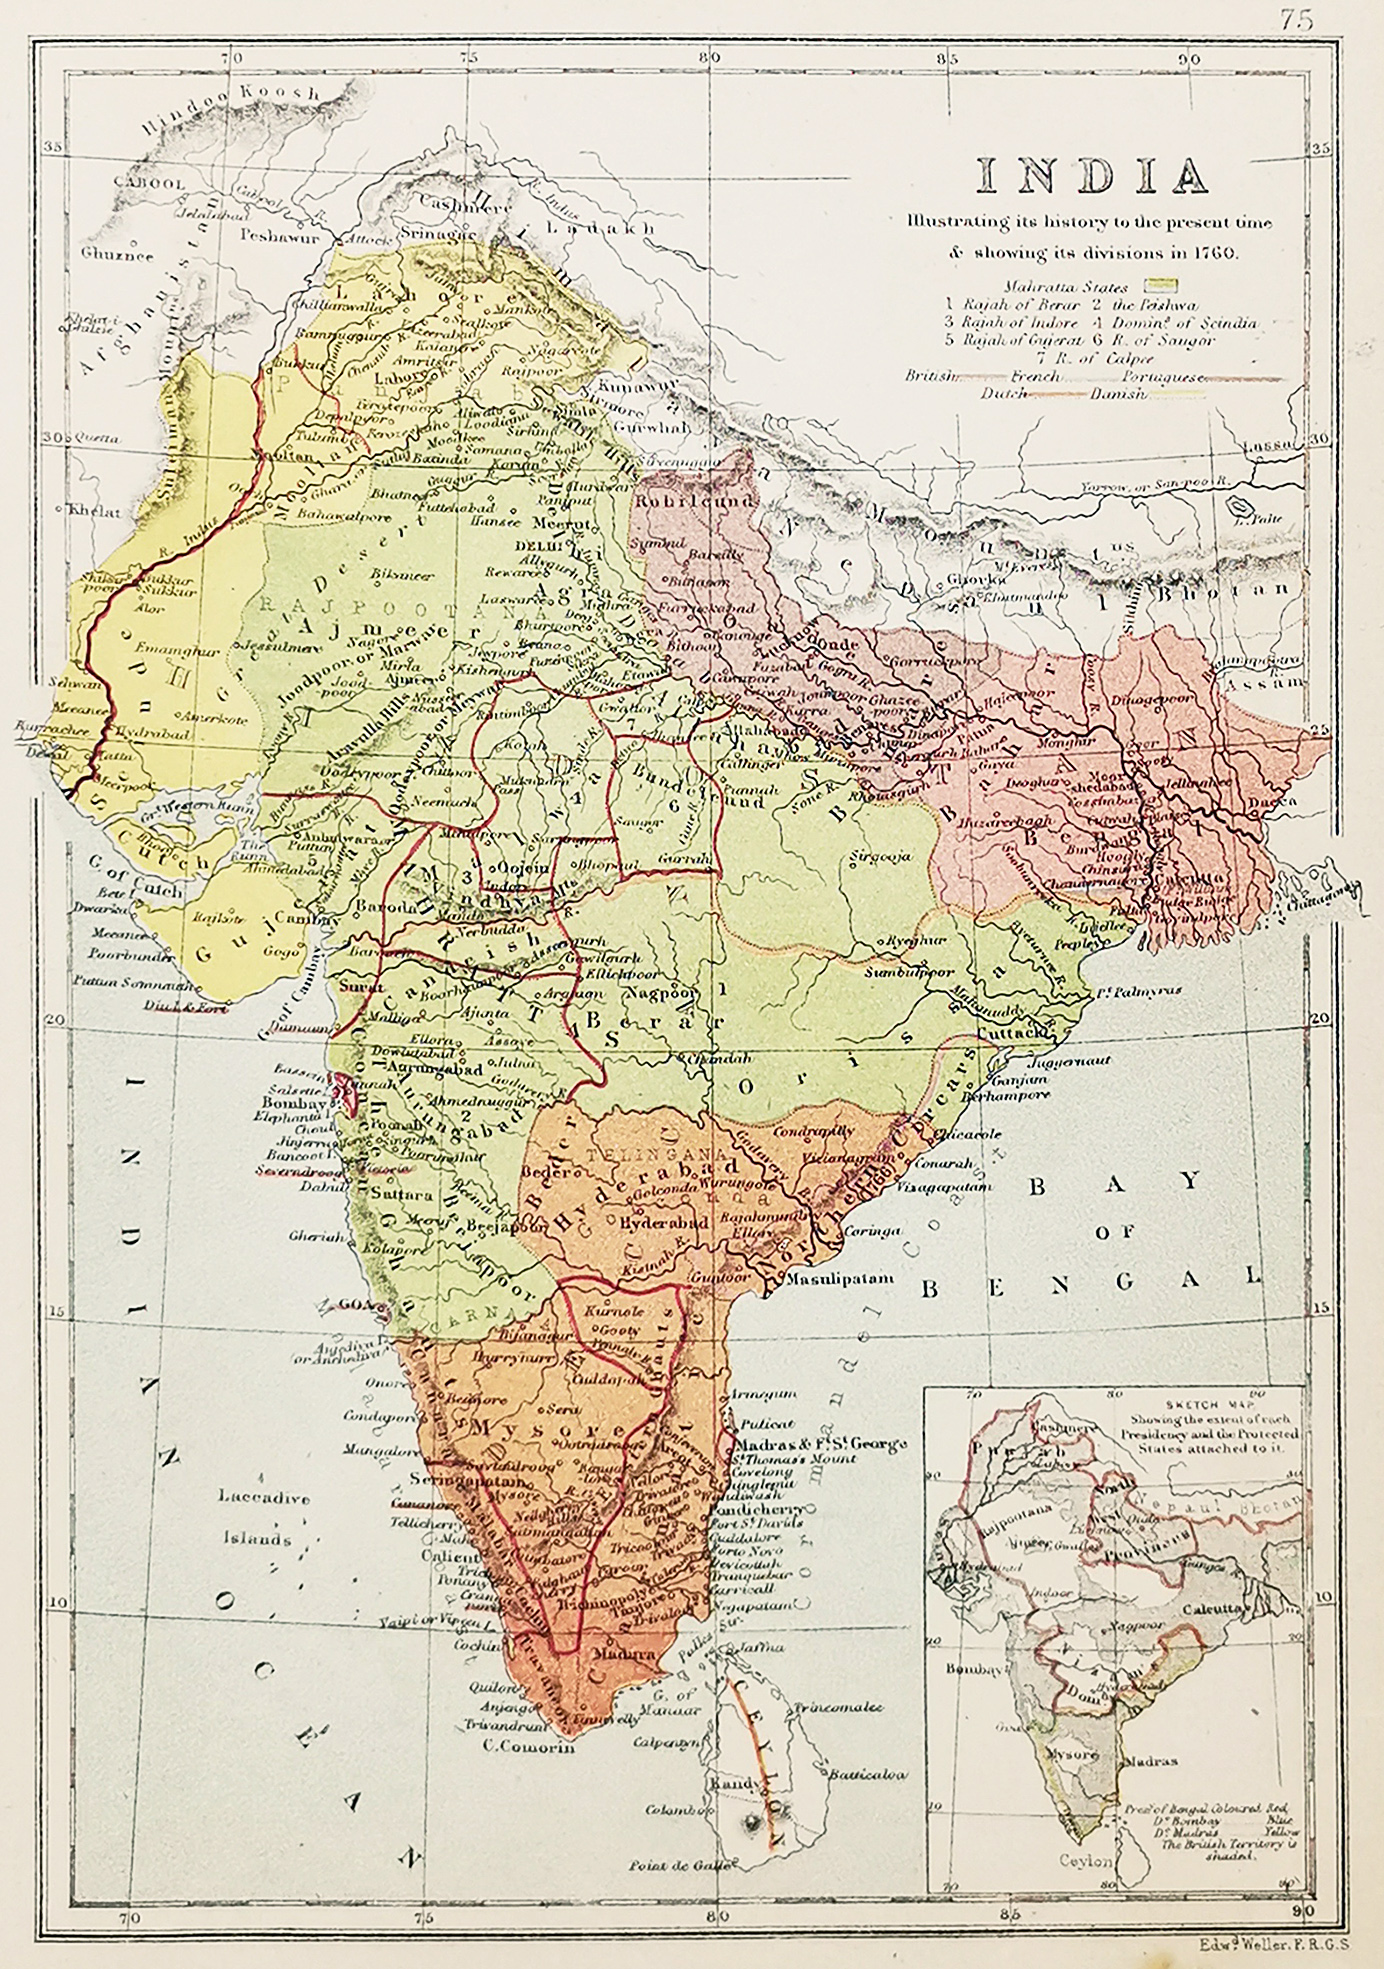 India Illustrating its History to the Present Time and Showing its Divisions in 1760. - Antique Print from 1875